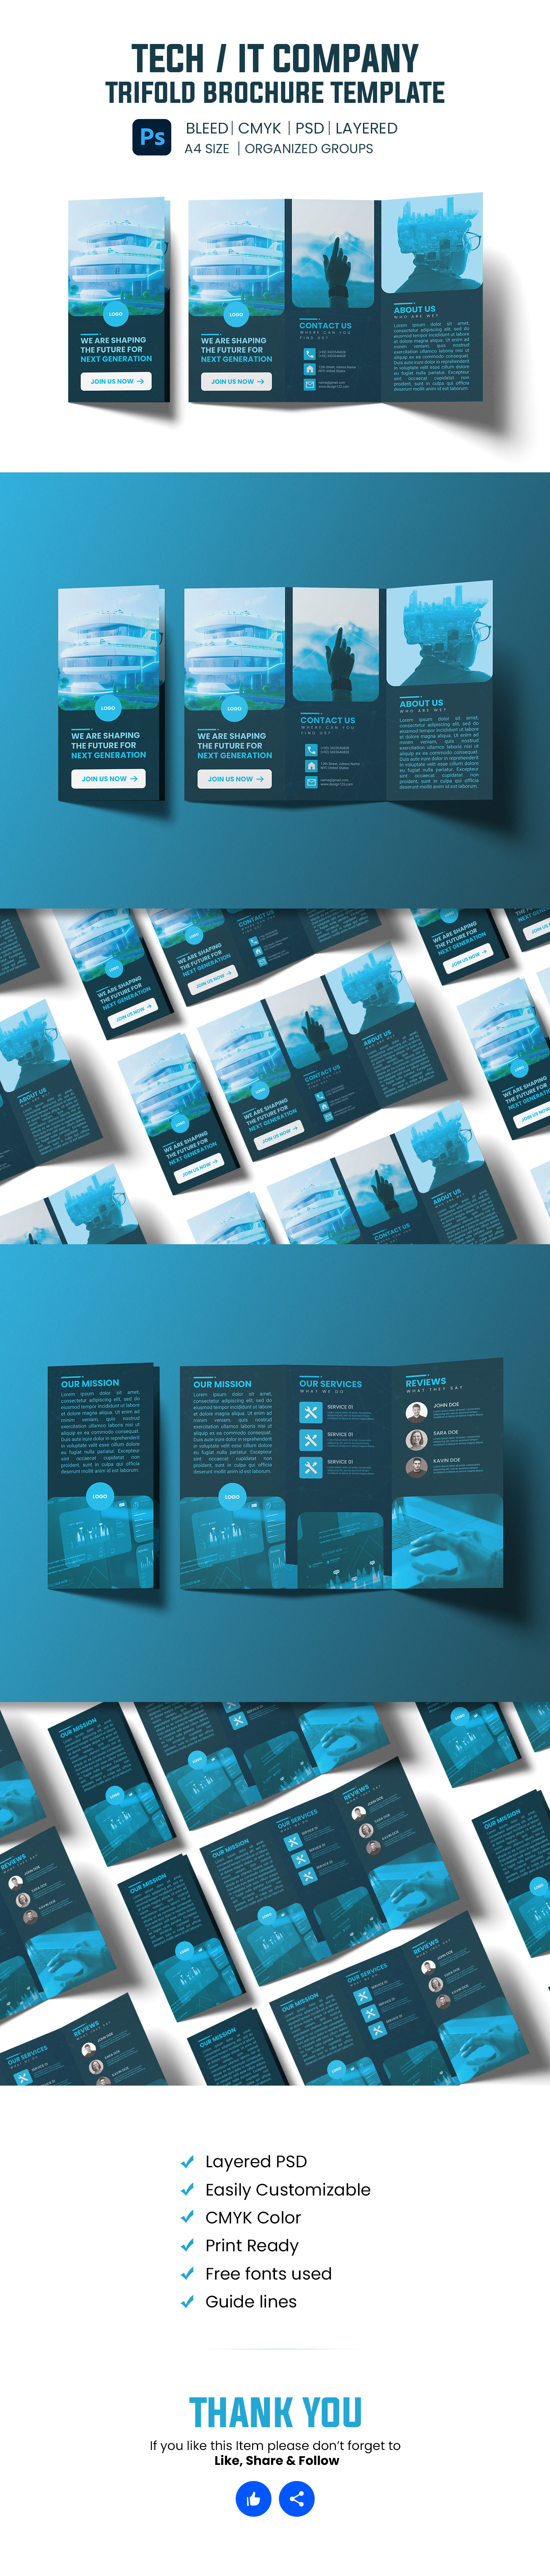 Technology brochure print Layout trifold brochure business Advertising  Adobe Photoshop layered template